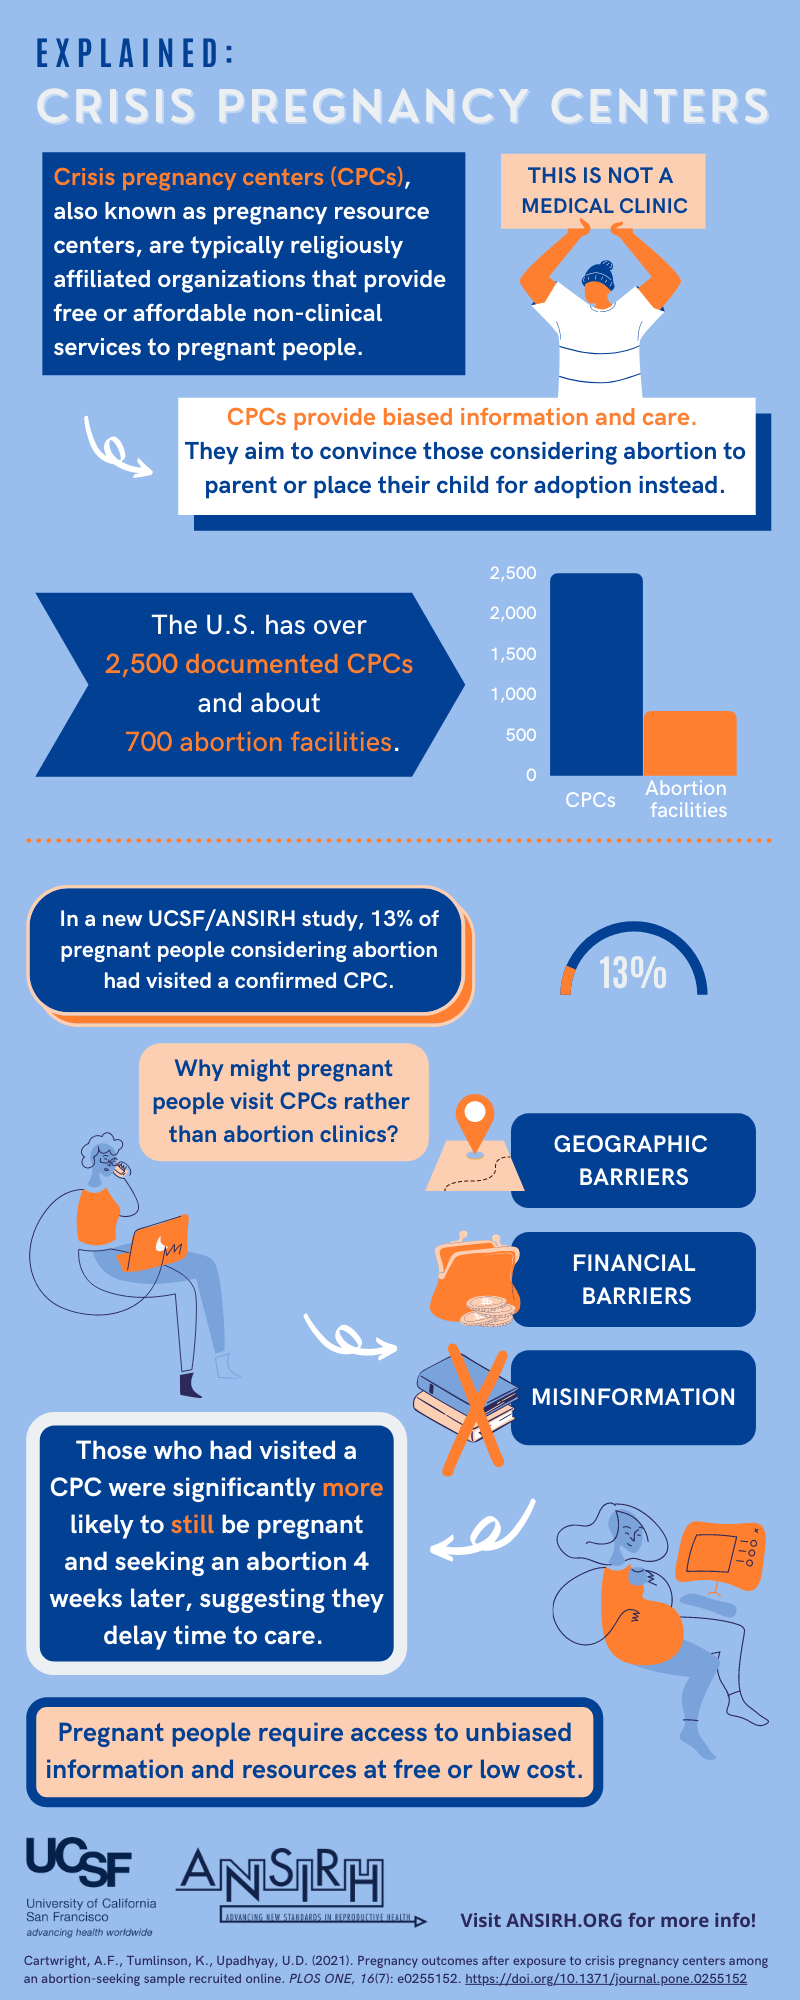 An infographic explaining CPCs and characteristics associated with visiting a CPC and compared pregnancy and abortion outcomes for those who reported a CPC visit.